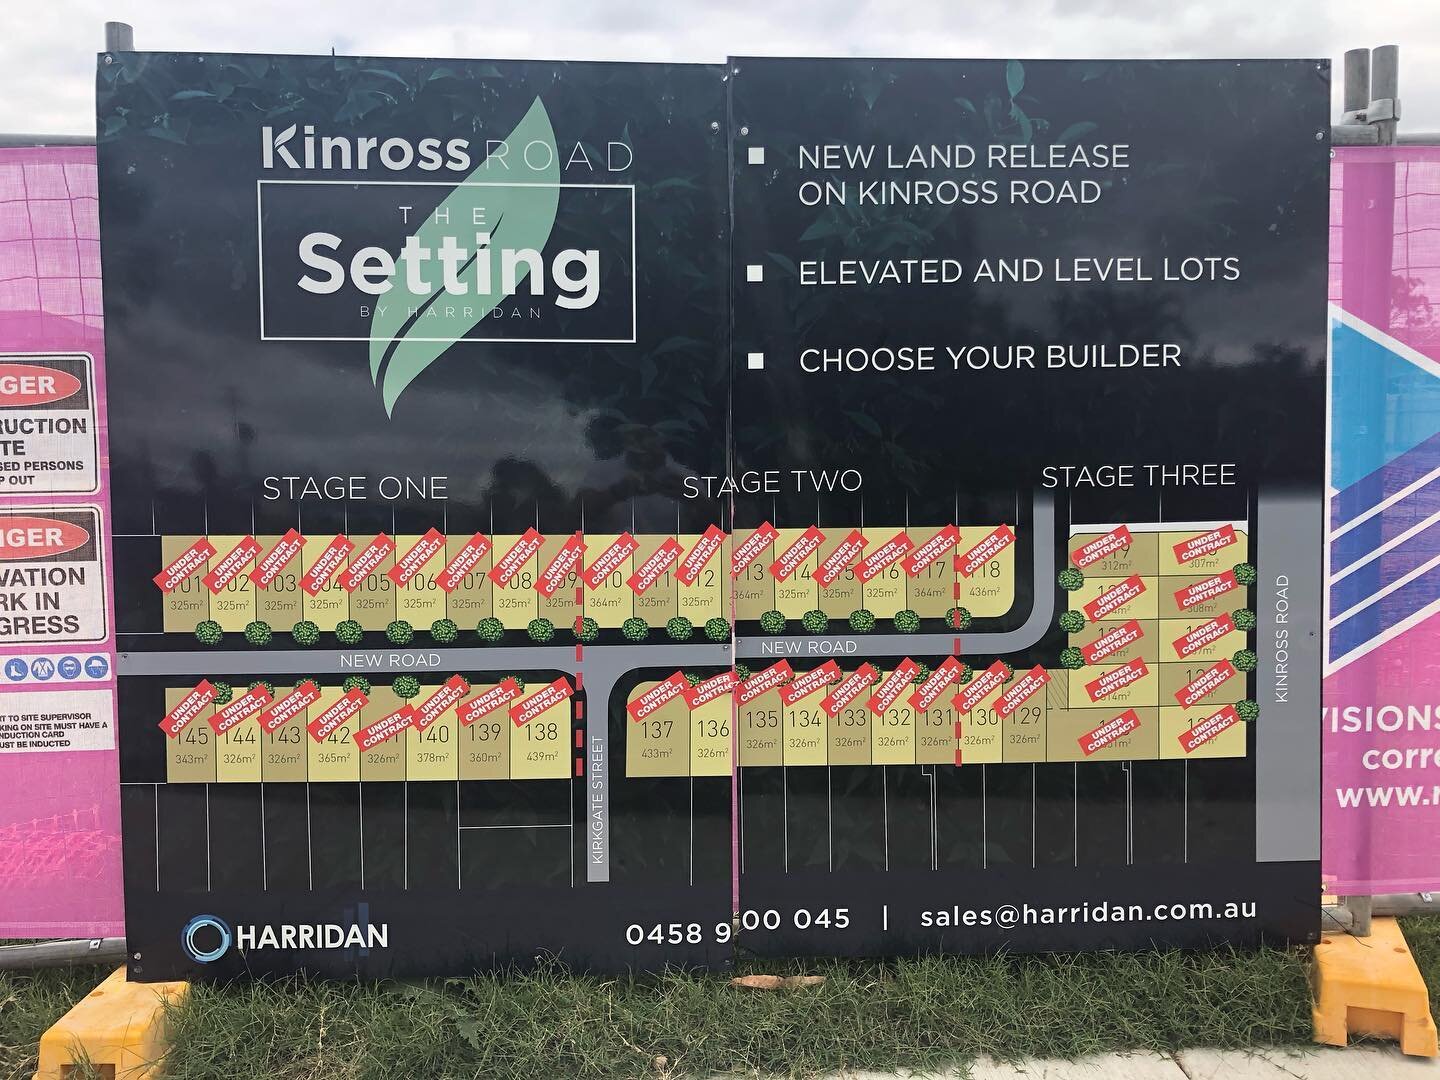 Well that went quick...💨🏡

The Setting  Kinross road, all lots now under contract! 

Buyers are welcome to still express interest should any lots become available. Don&rsquo;t hesitate to reach out today for more information

📲 0458 900 045
📩 sal